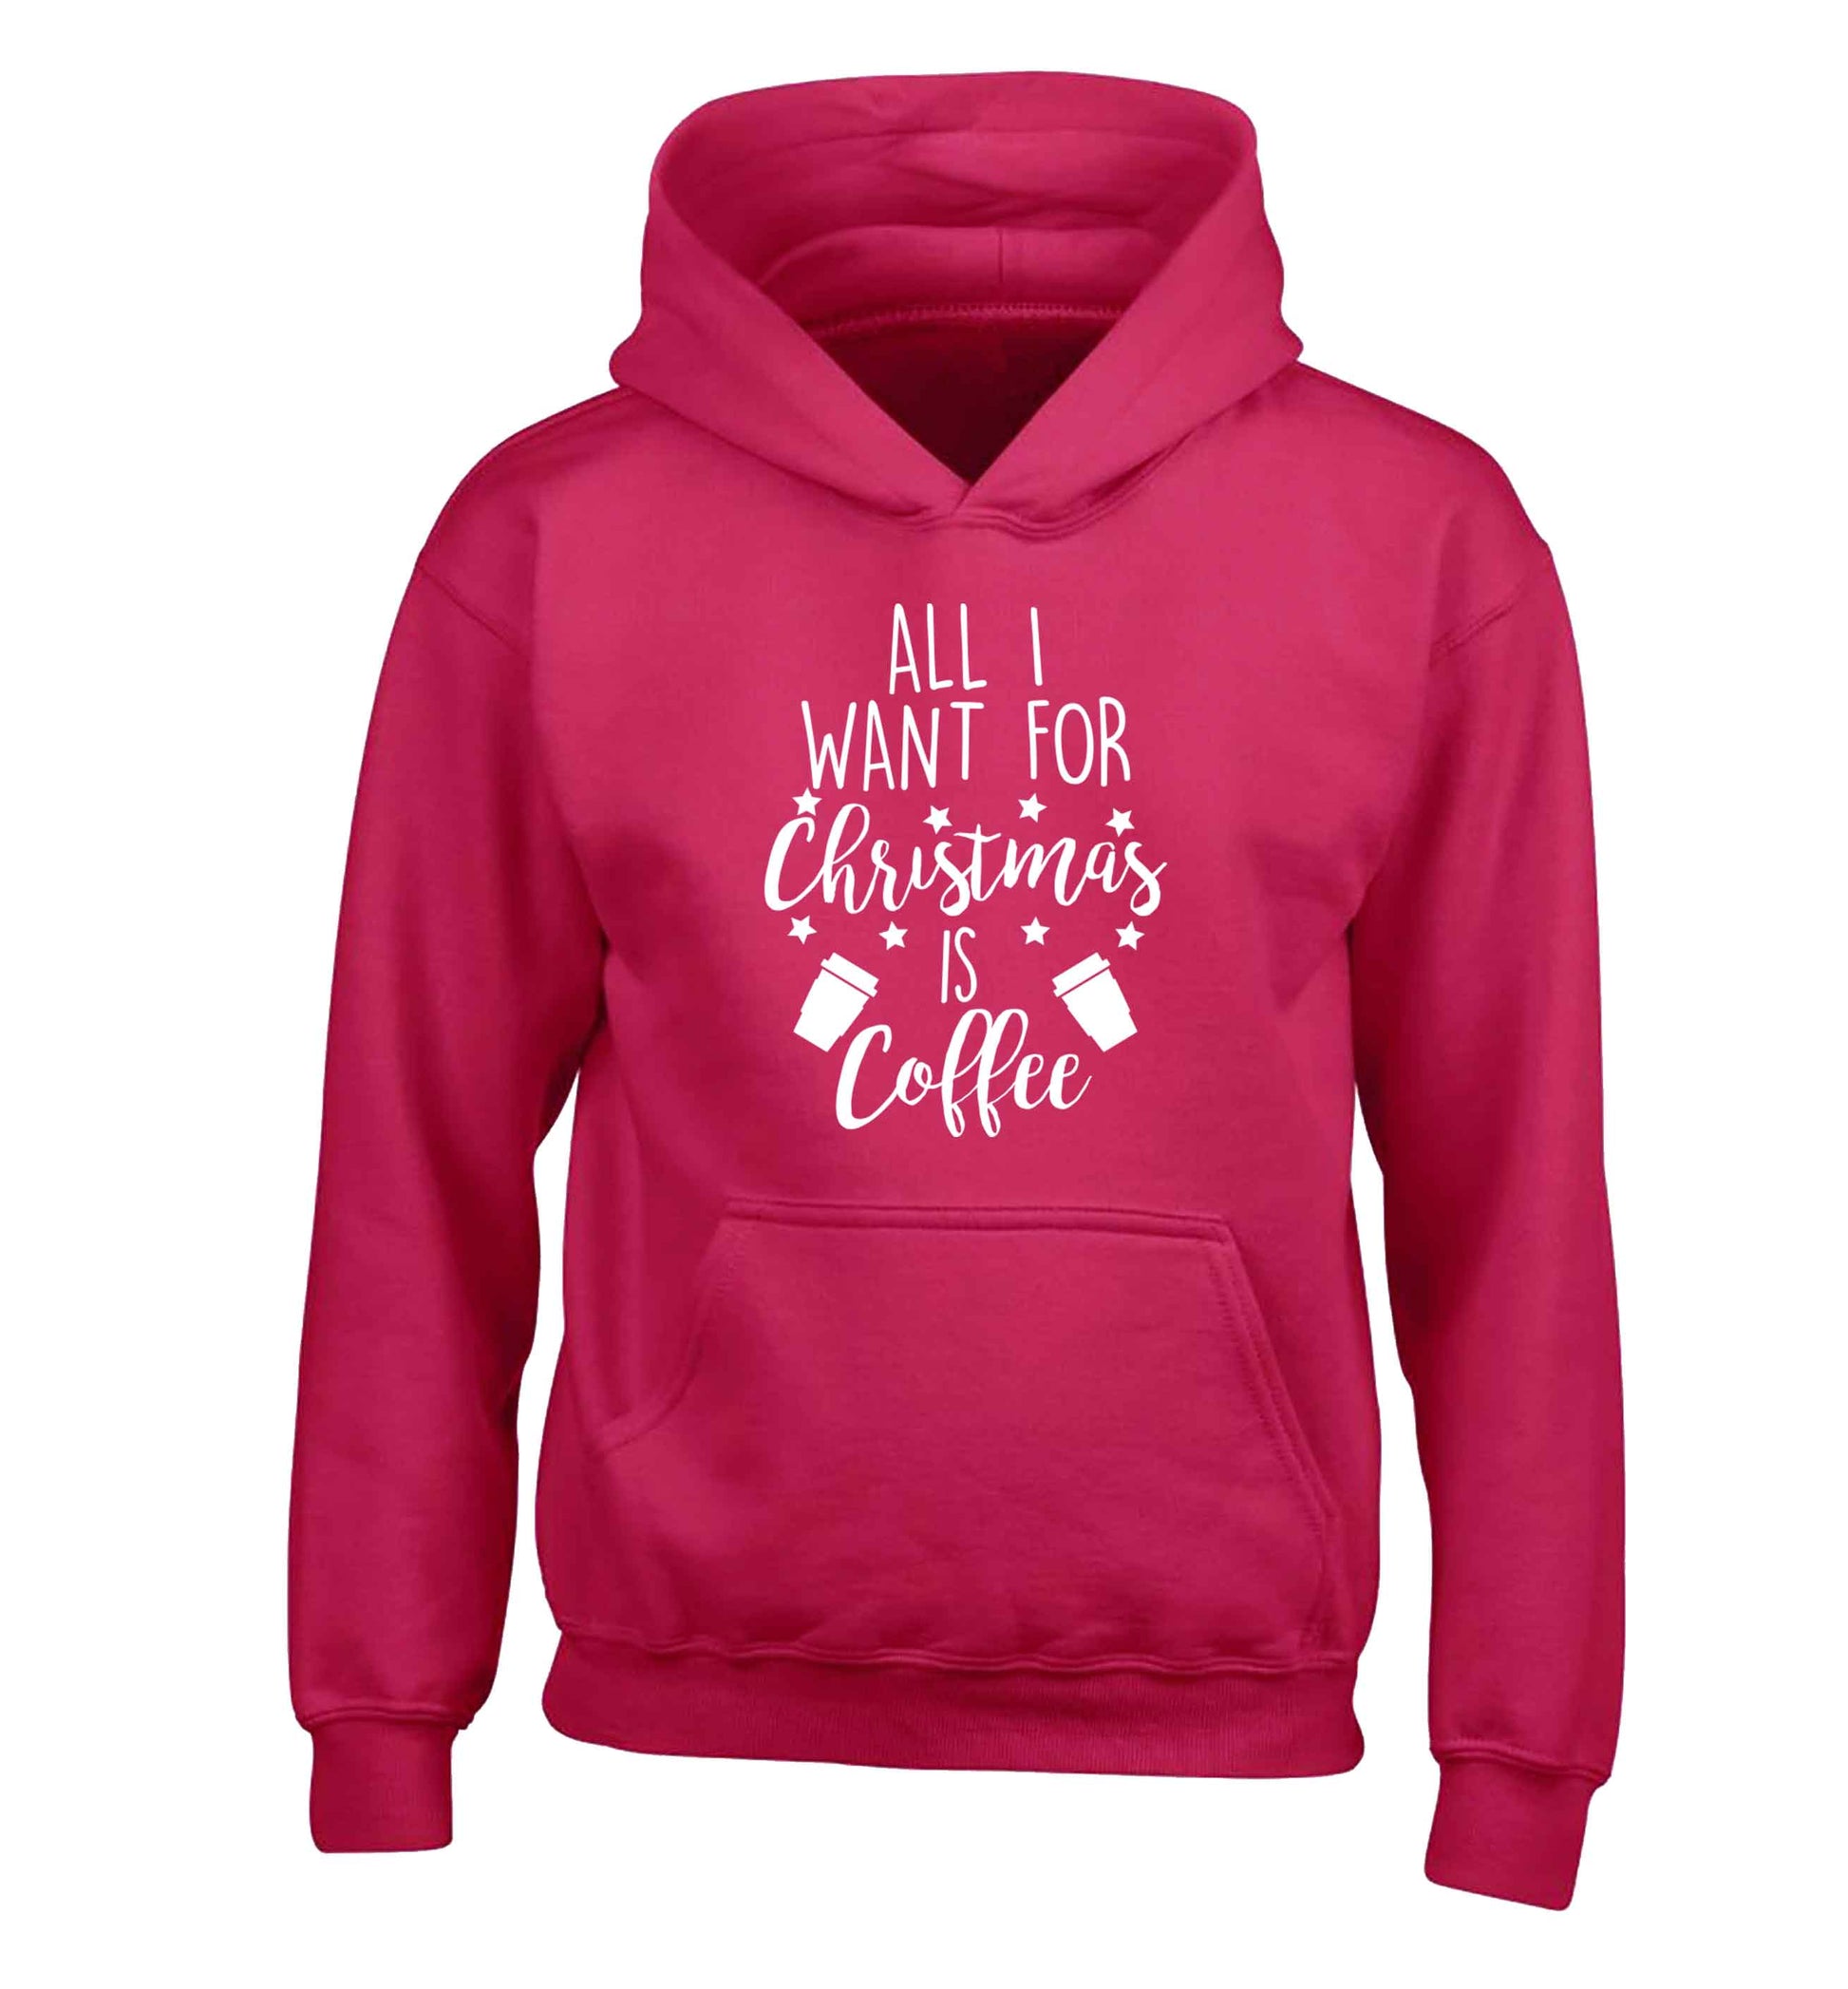 All I want for Christmas is coffee children's pink hoodie 12-13 Years